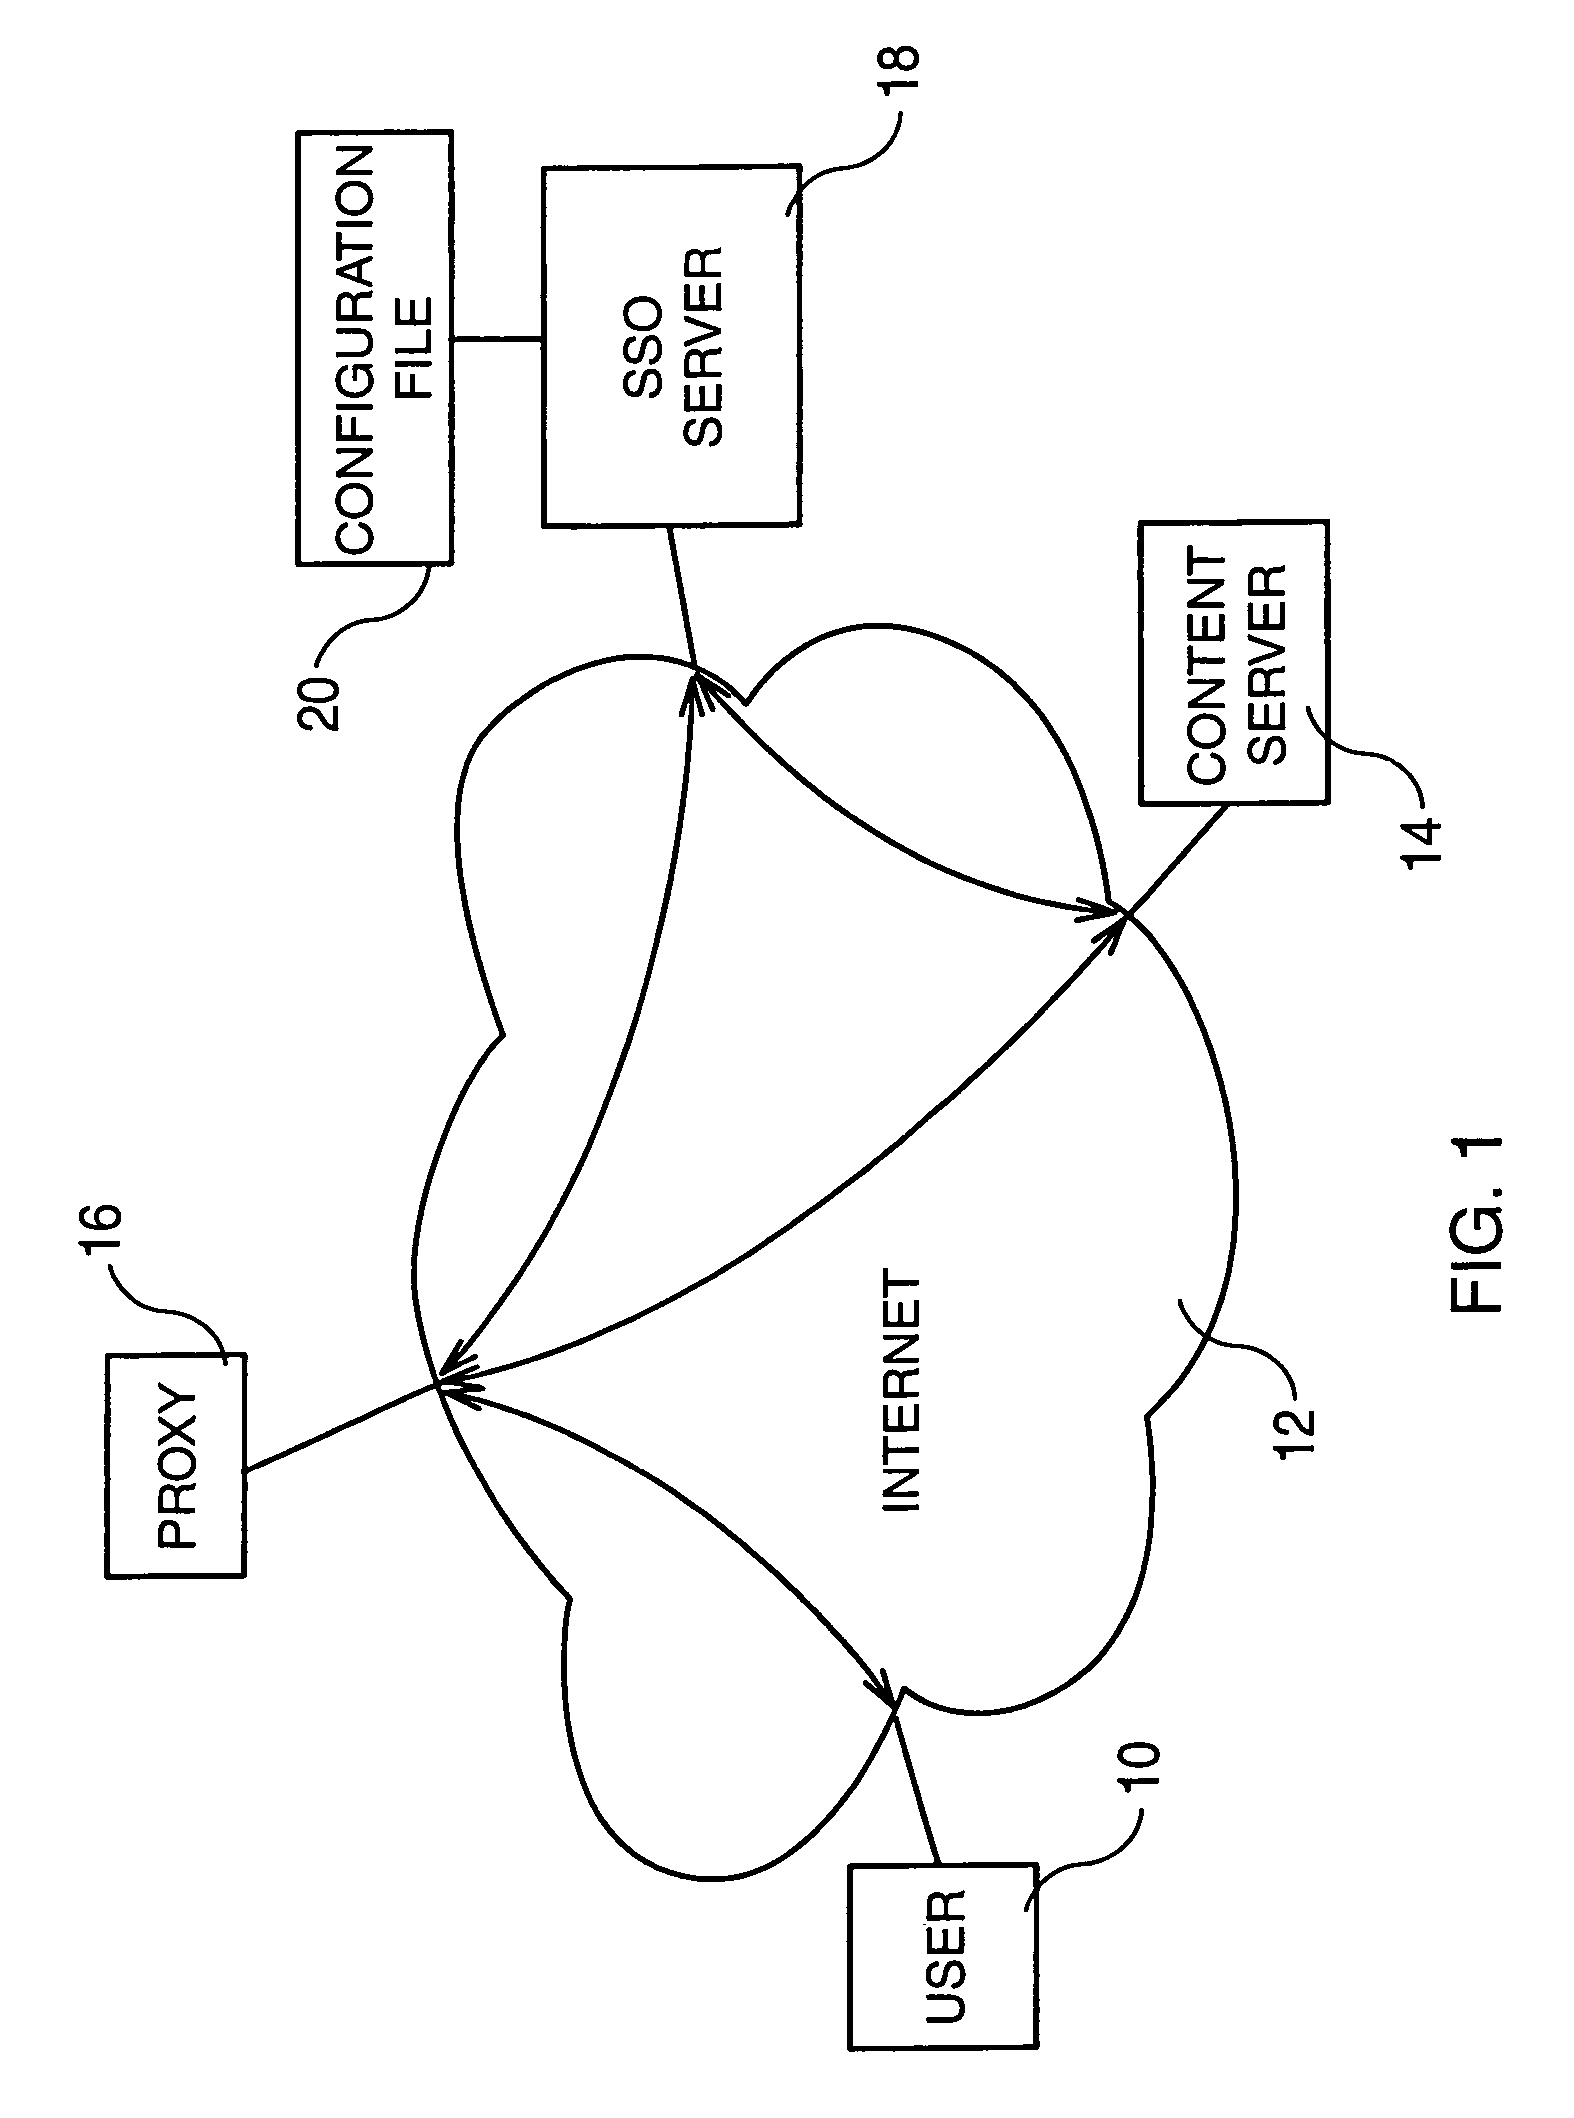 Method and system for accessing internet resources through a proxy using the form-based authentication